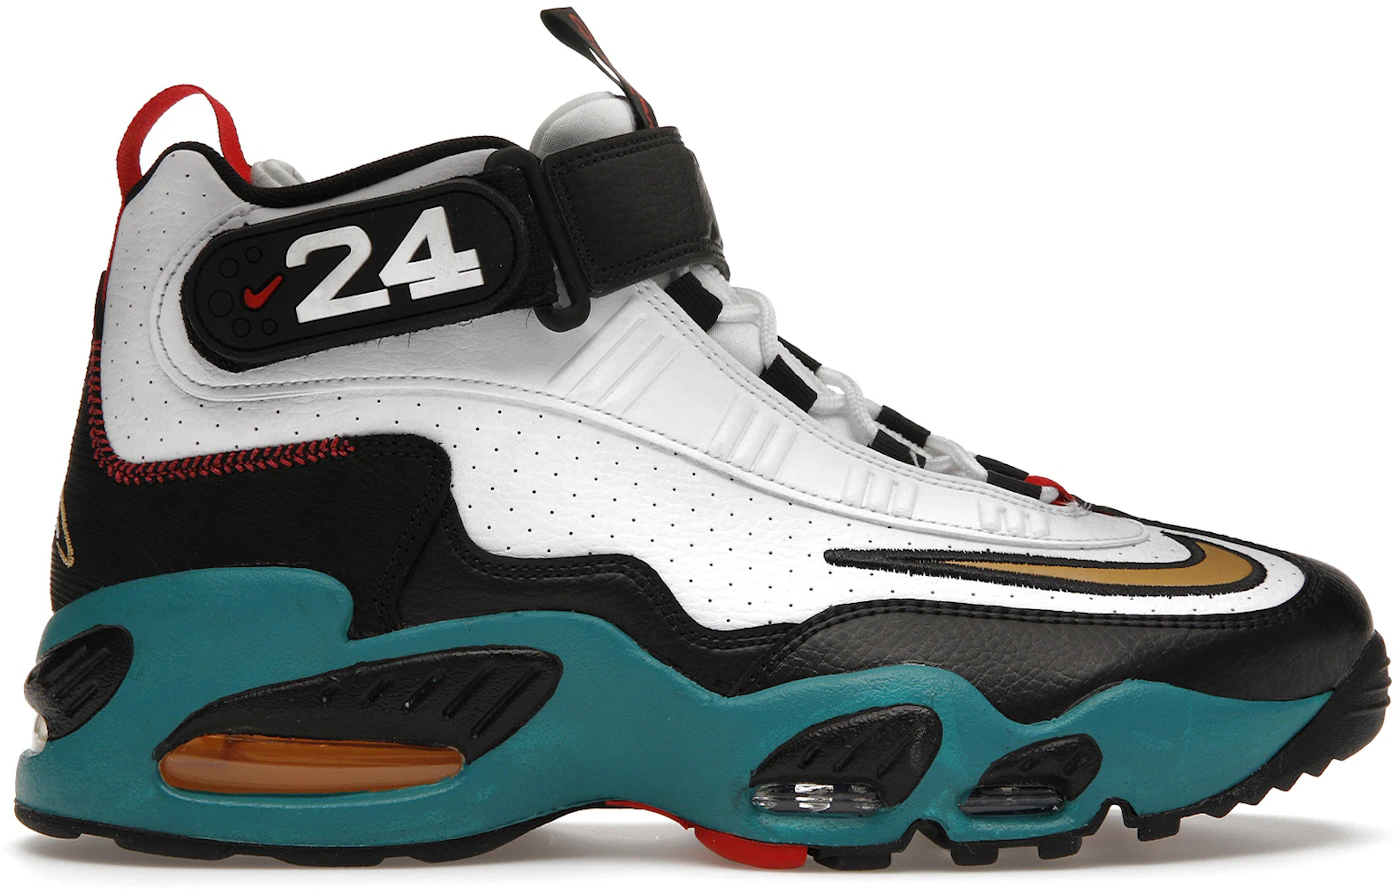 Video: Nike Air Griffey Max 1 Freshwater On Feet. Make sure to